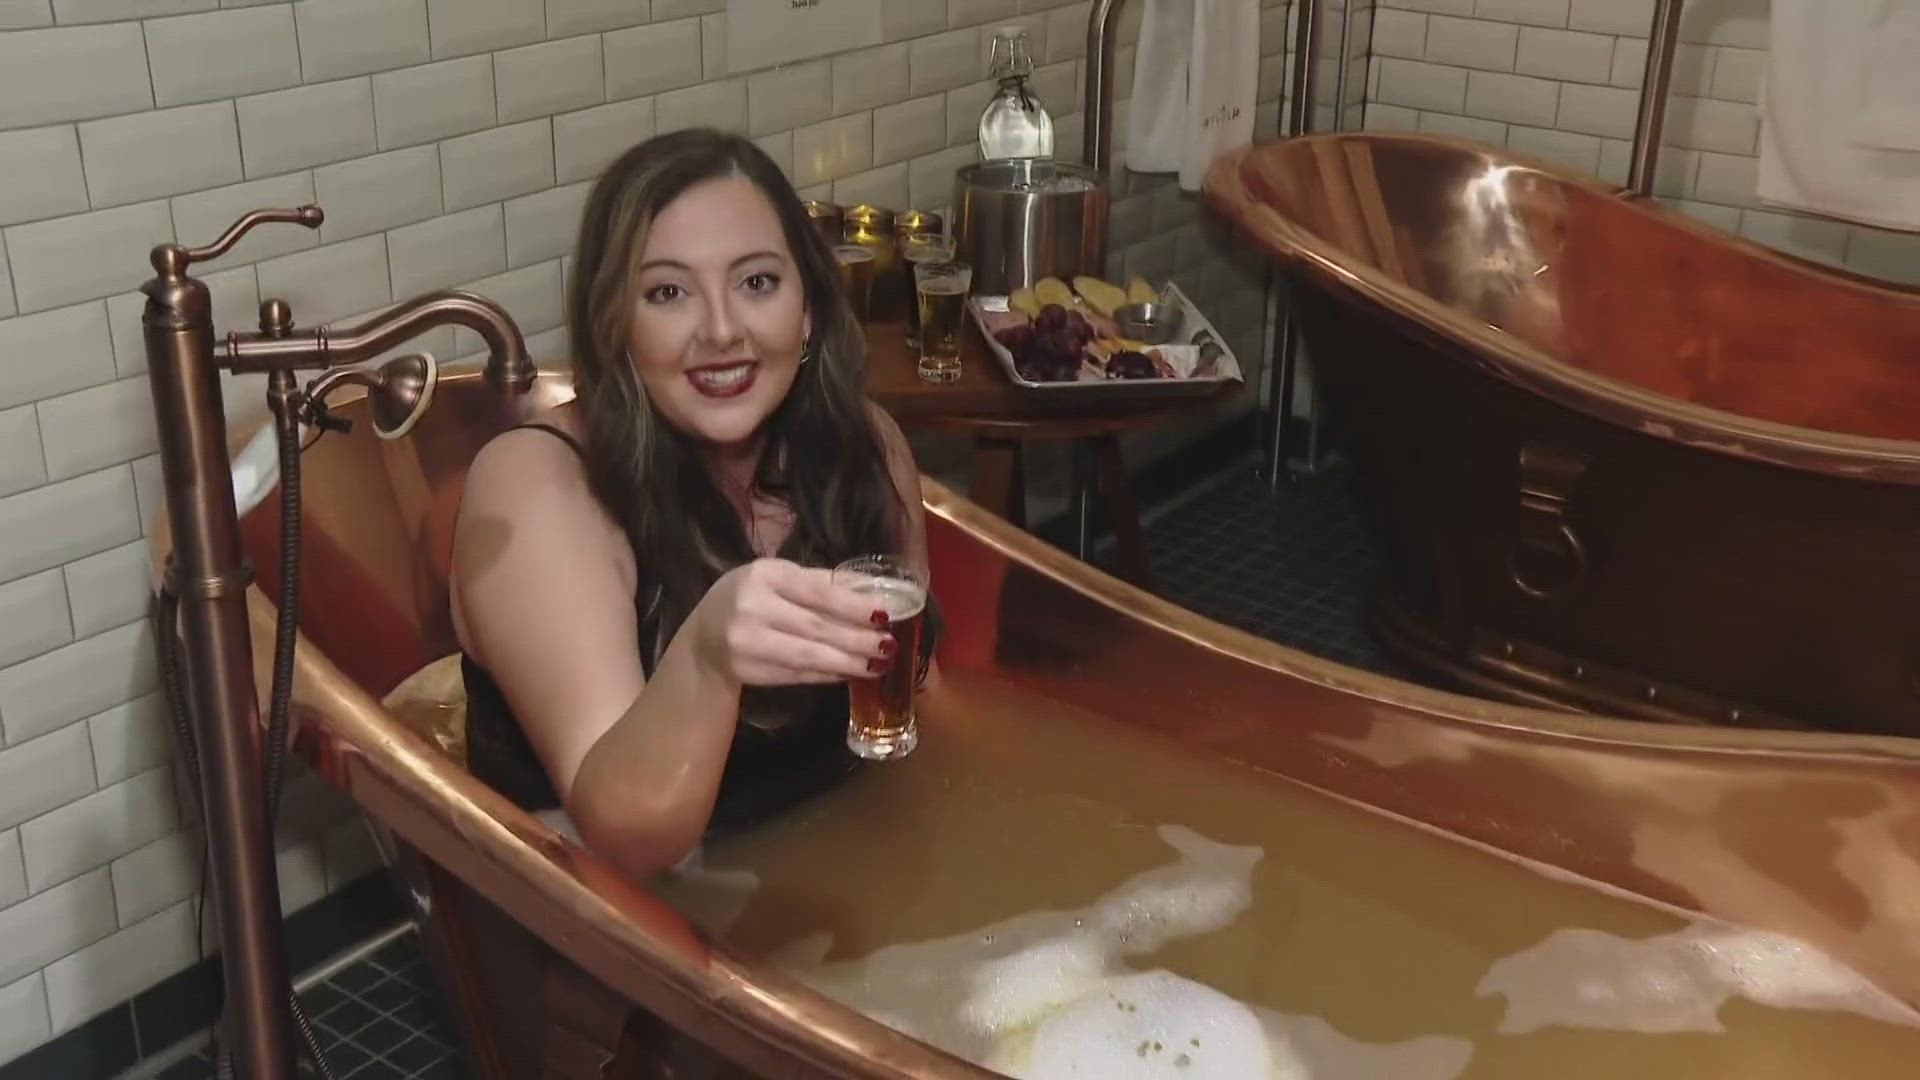 The unique spa at Pivovar in Waco offers a special experience bound to make anyone "hoppy".